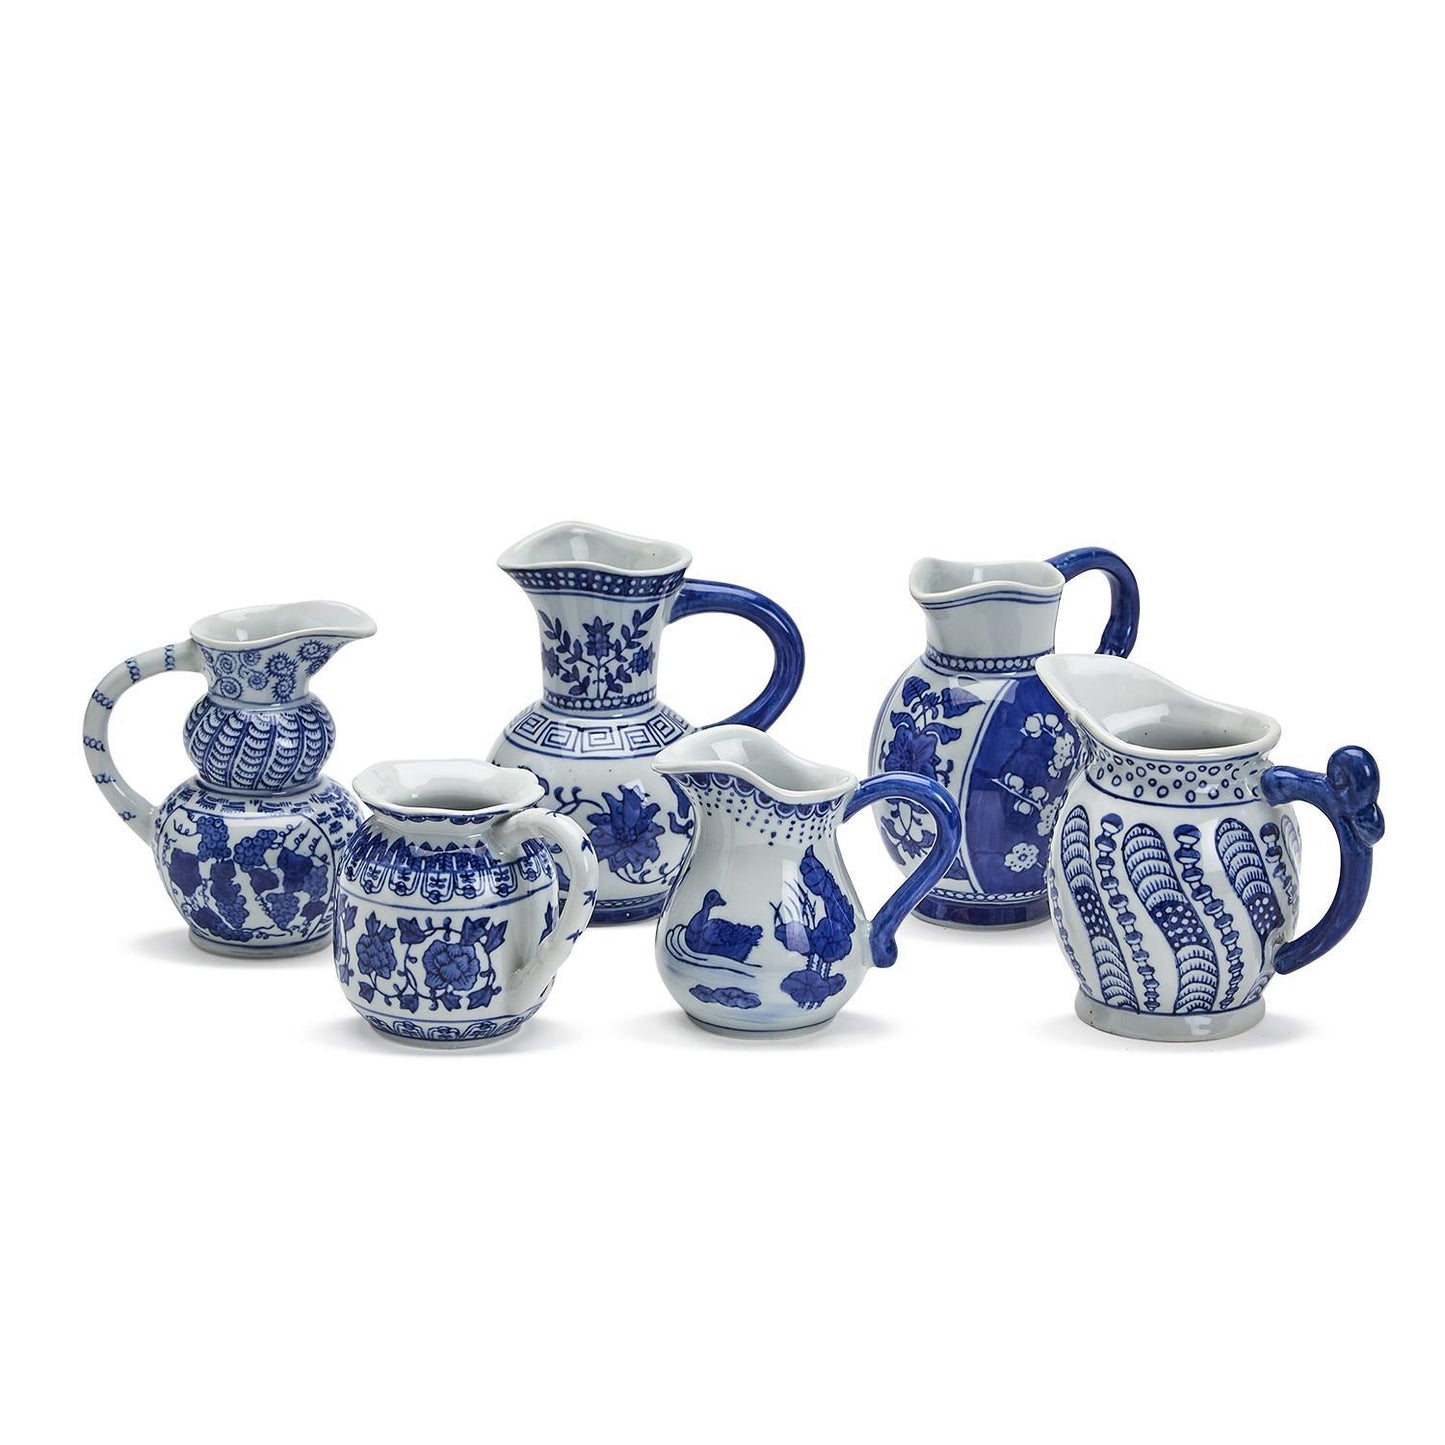 Two's Company Canton Collection Set Of 6 Blue and White Decorative Pitchers